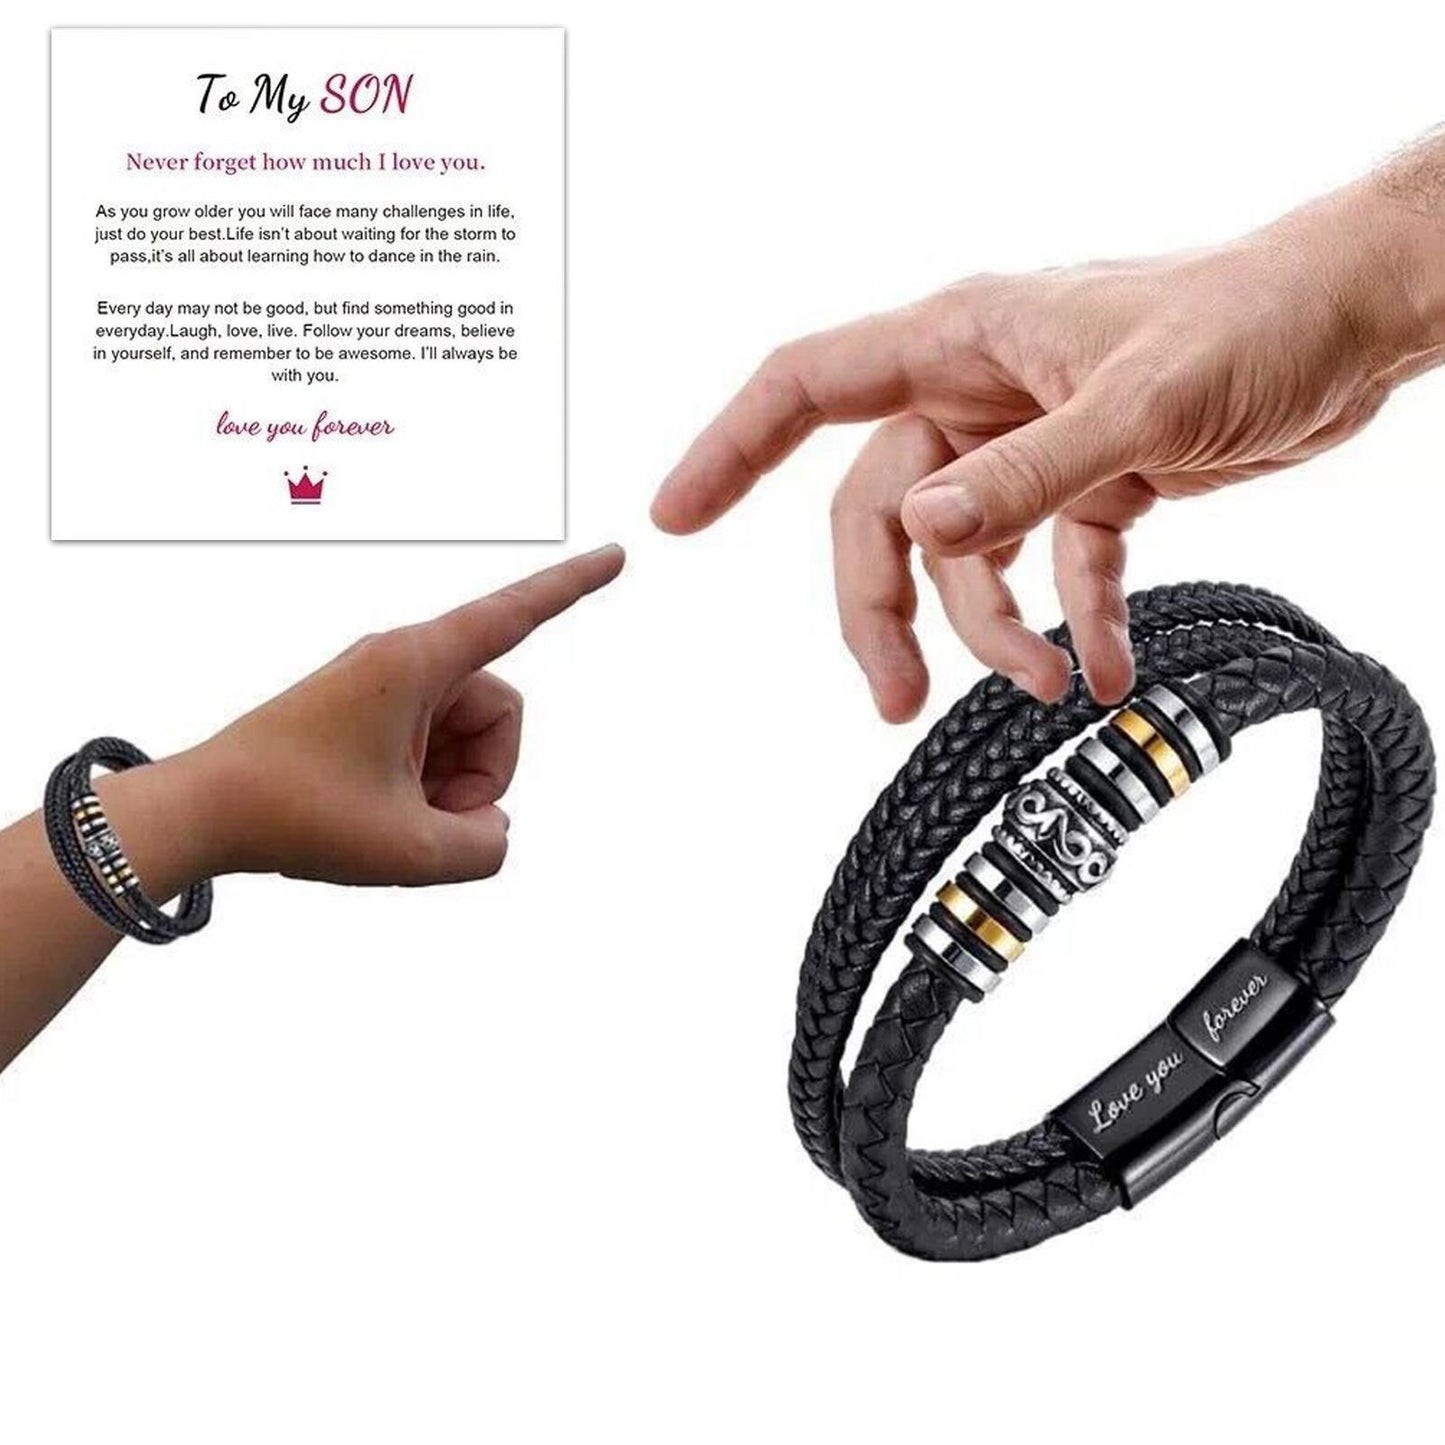 To My Son - Love You Forever - Braided Leather Bracelet